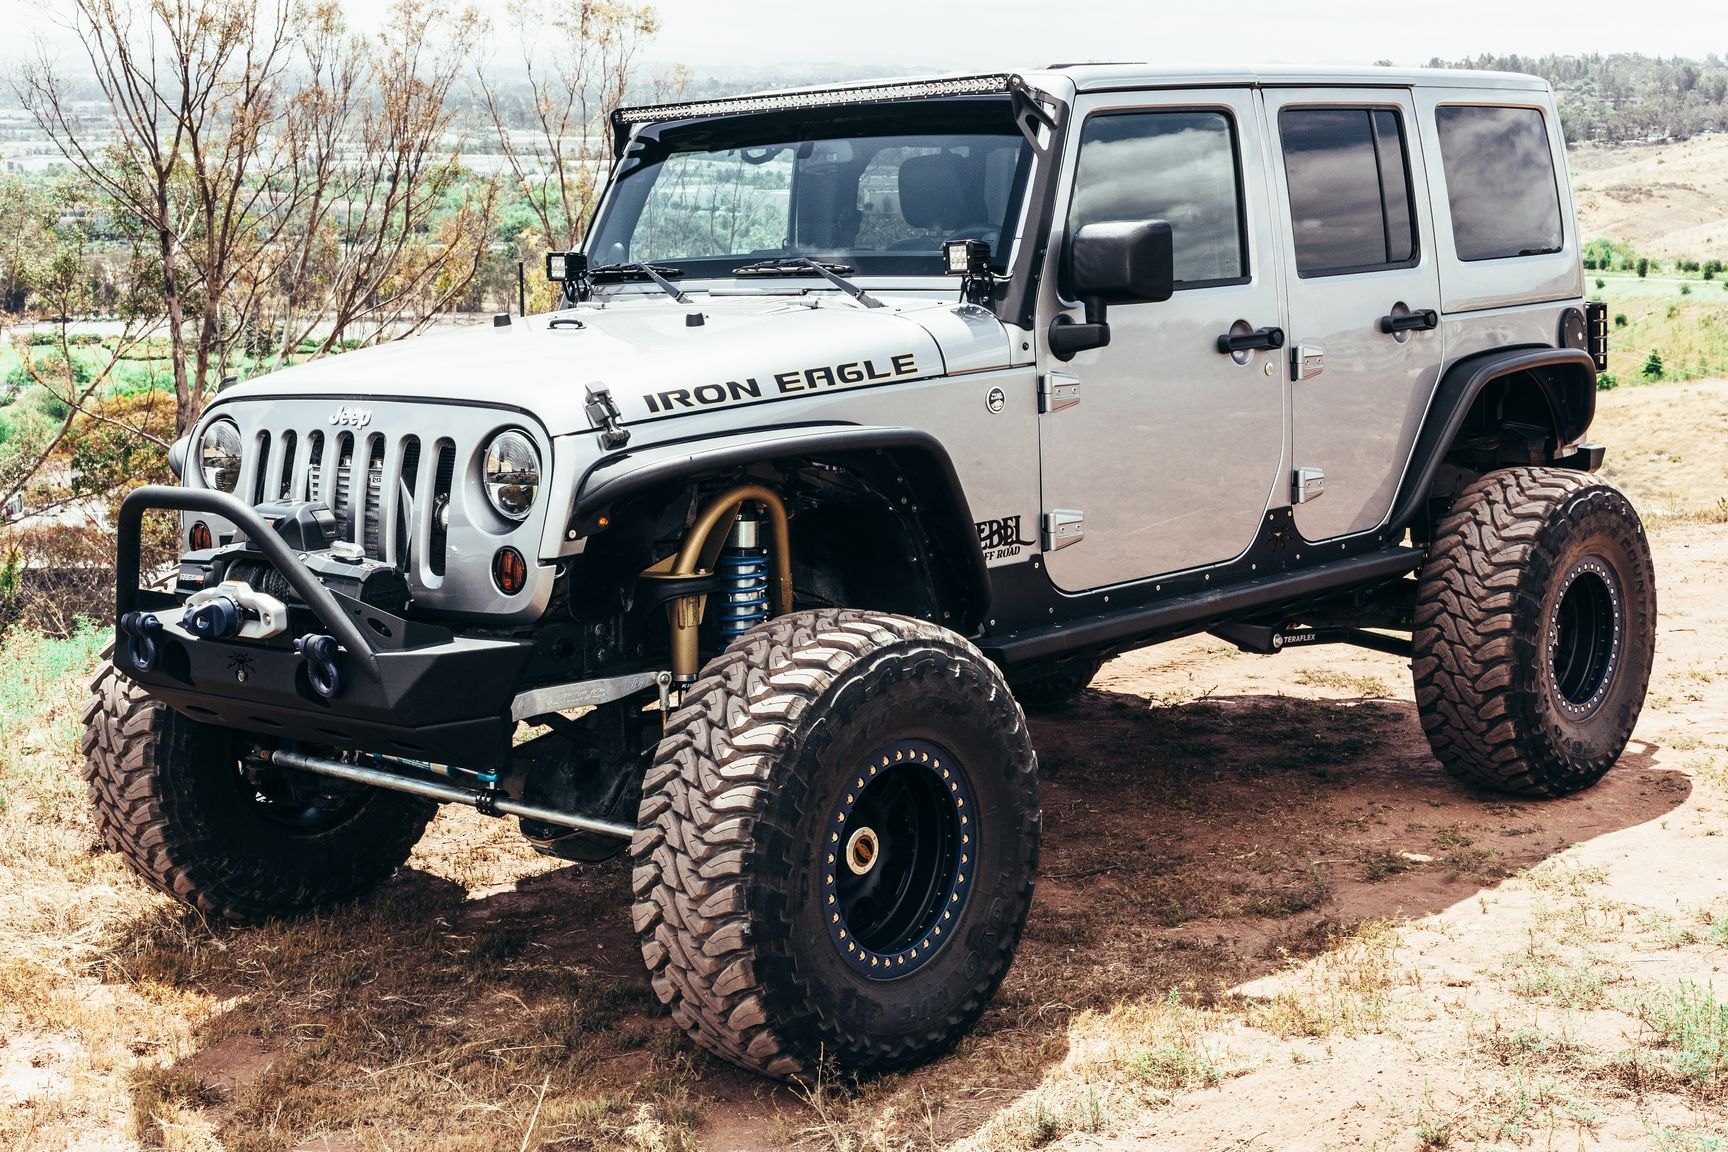 Oversized R17 and R18 Off-Road Tires for Jeep Wrangler at CARiD   - The top destination for Jeep JK and JL Wrangler news, rumors, and  discussion